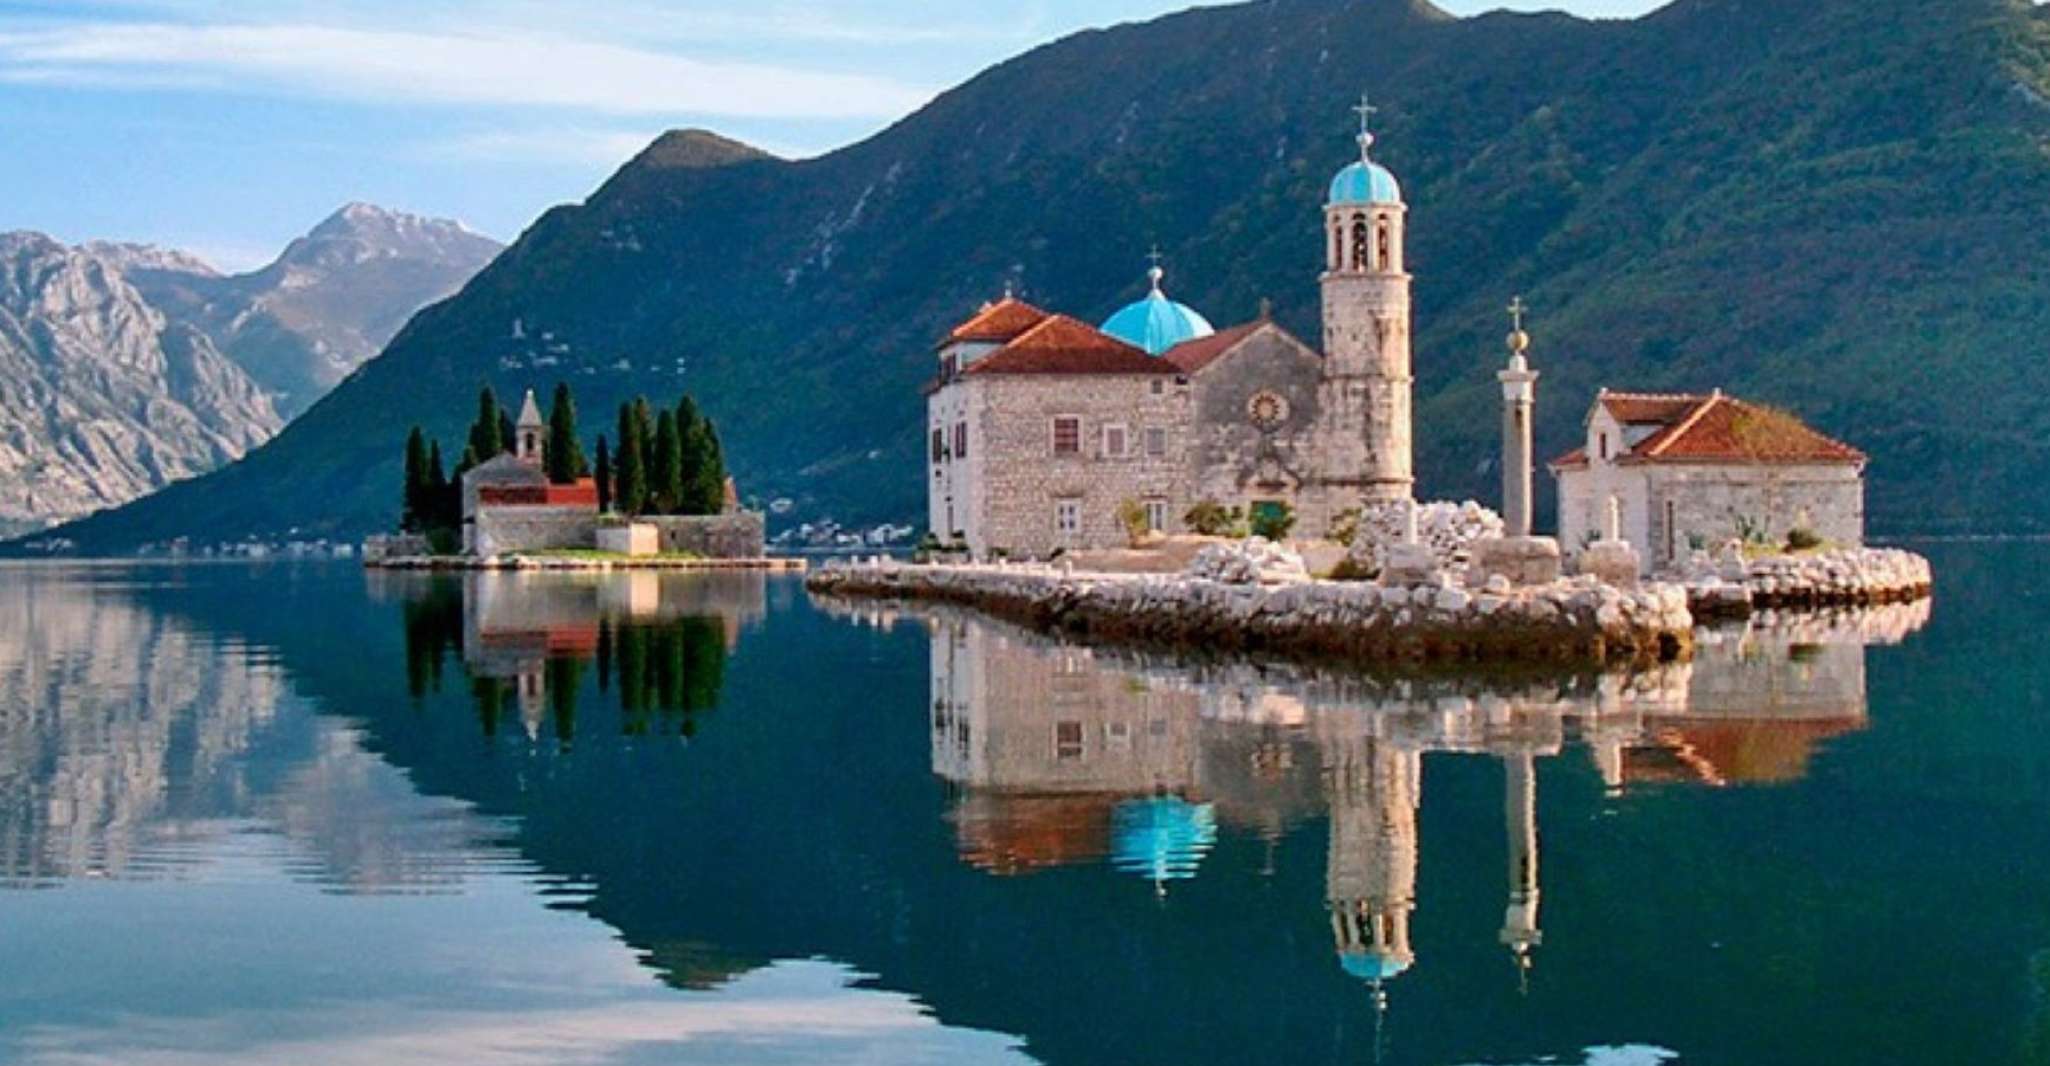 From Cavtat, Montenegro Day Trip & Boat Cruise in Kotor Bay - Housity